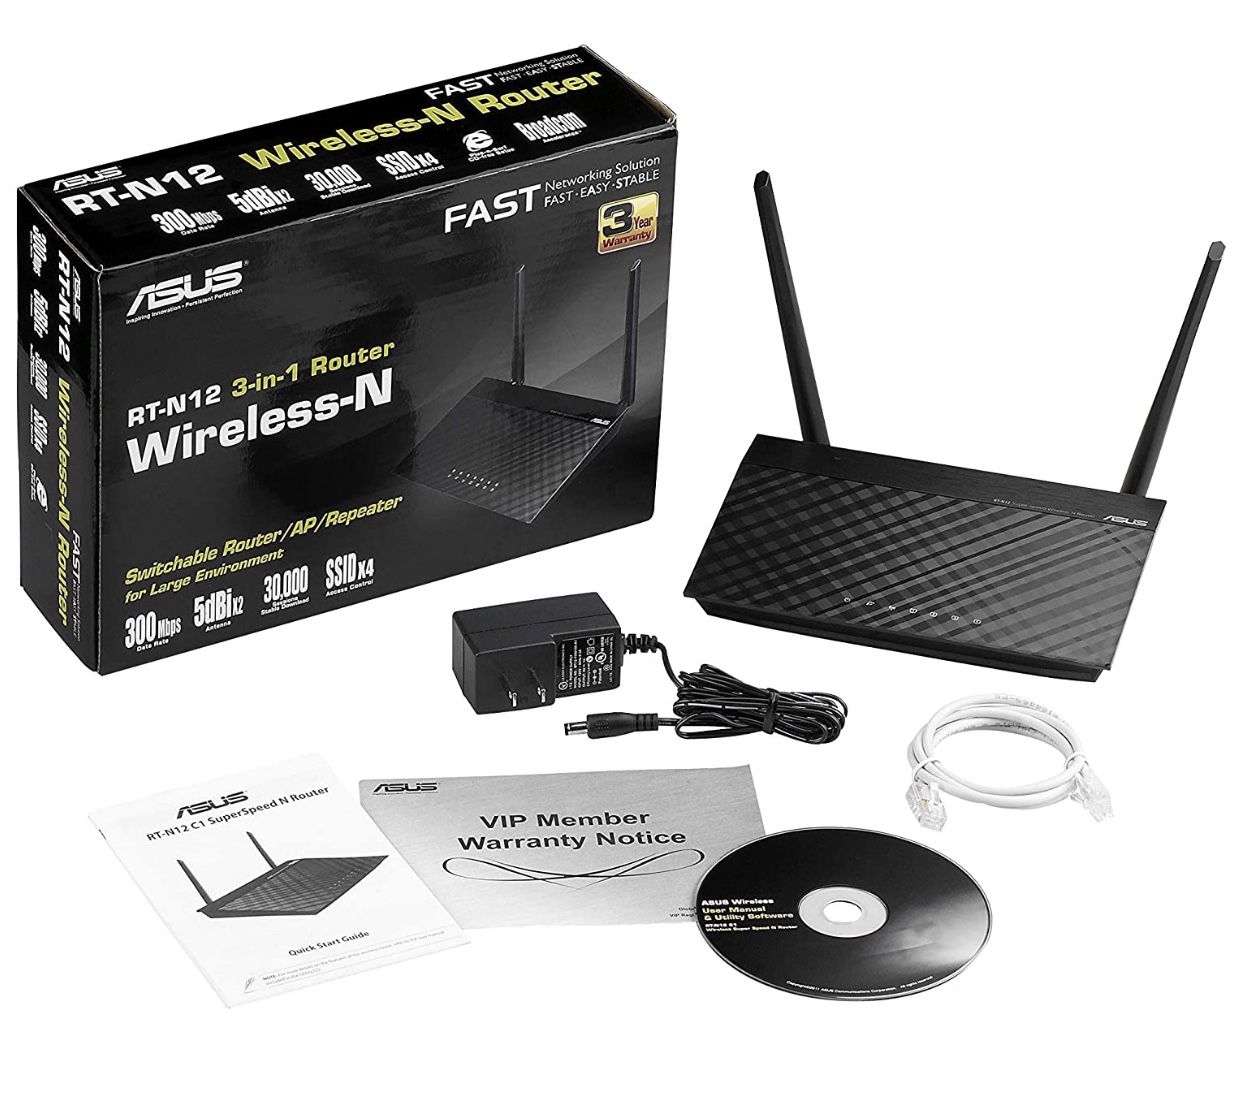 Asus RT-12N Wireless Router 3-in-1